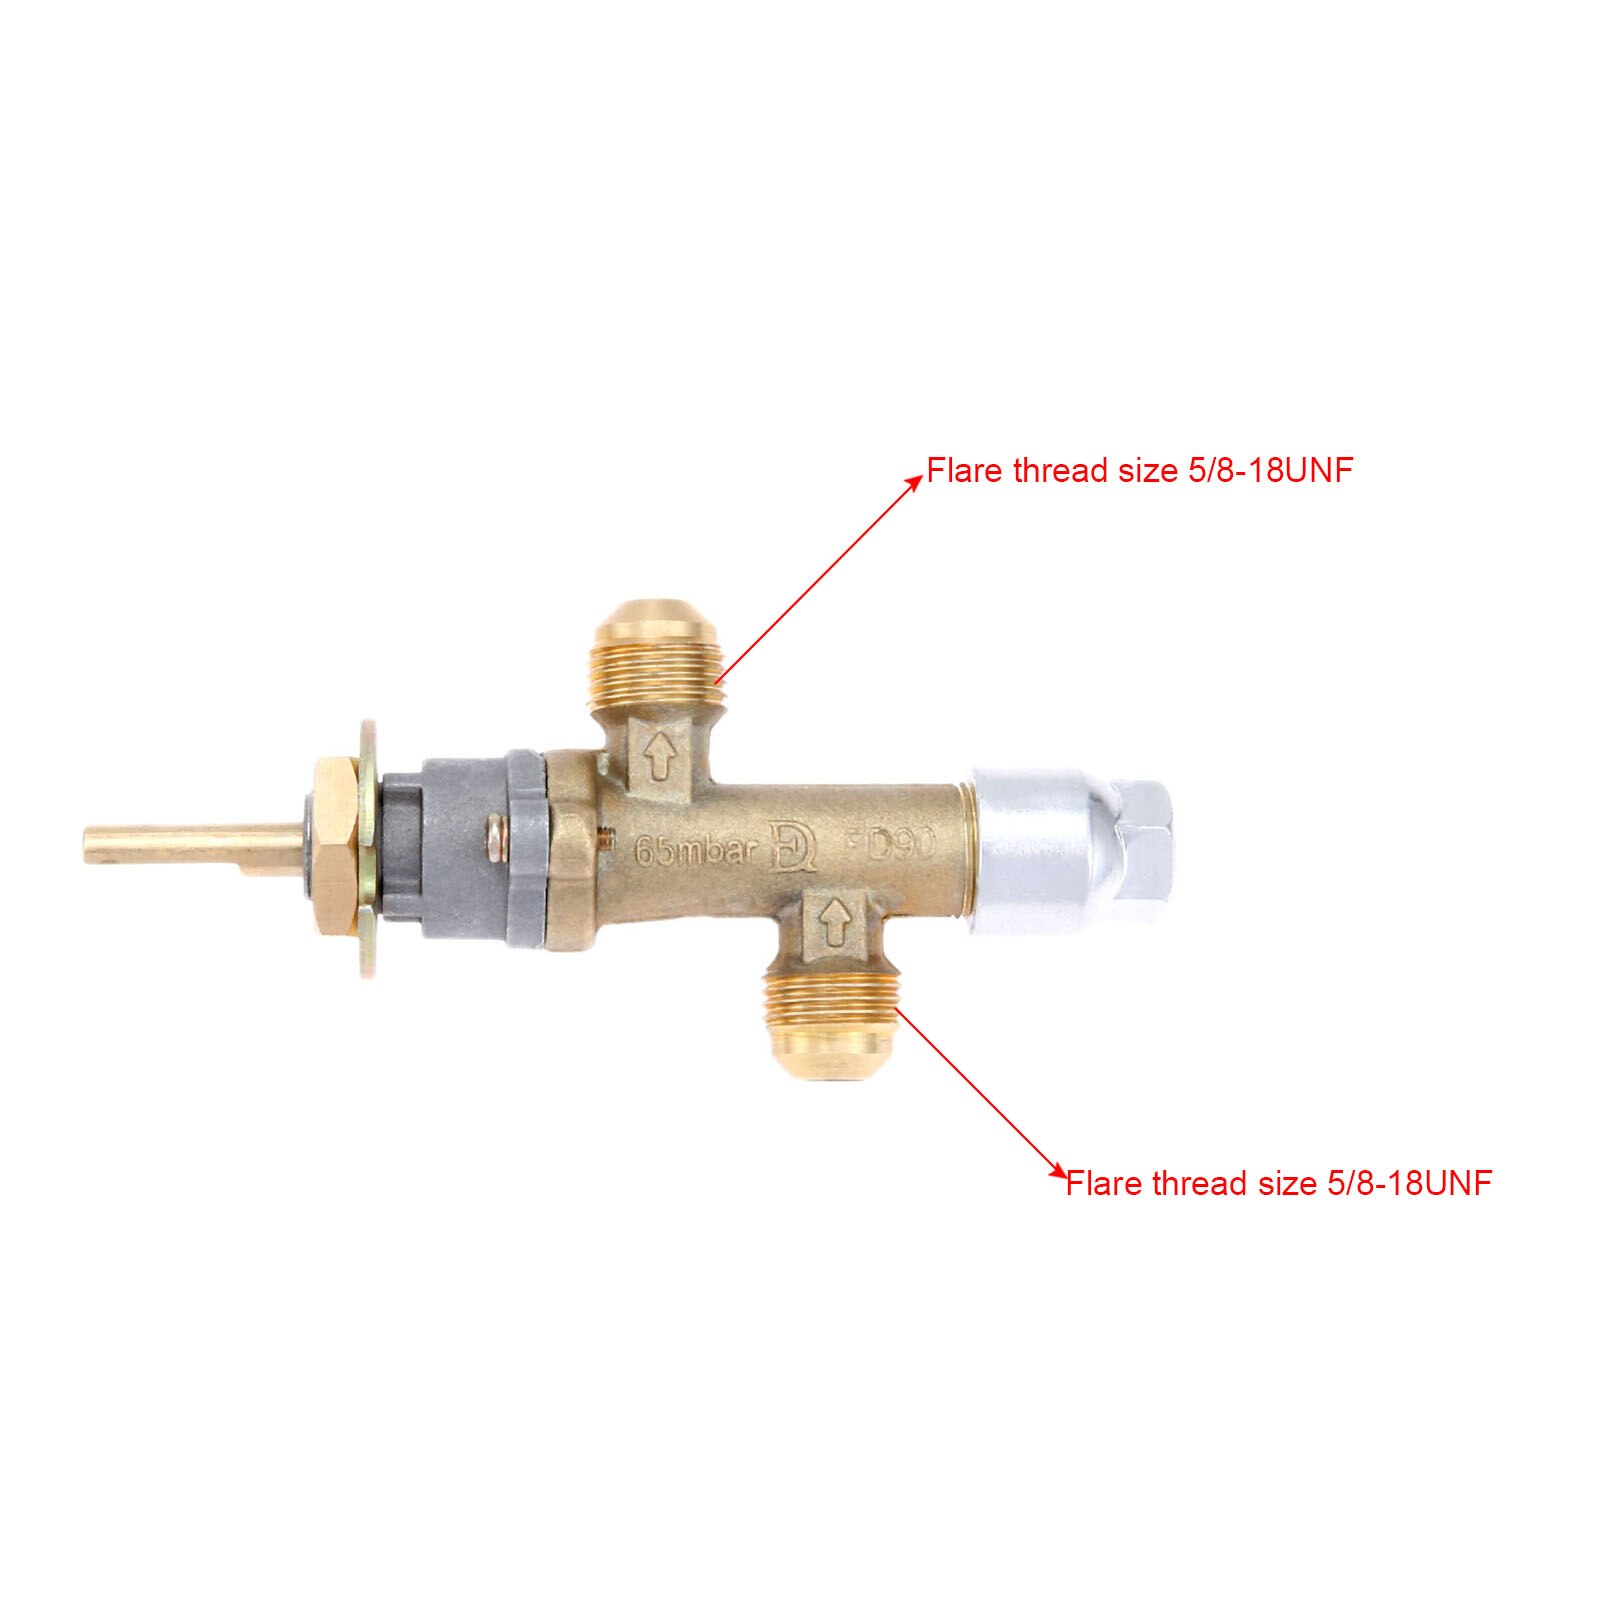 Gas Control Valve Propane Fire Pit Flame Failure Safety Valve with Inlet & Outlet for Gas Grill Heater Fireplace Parts